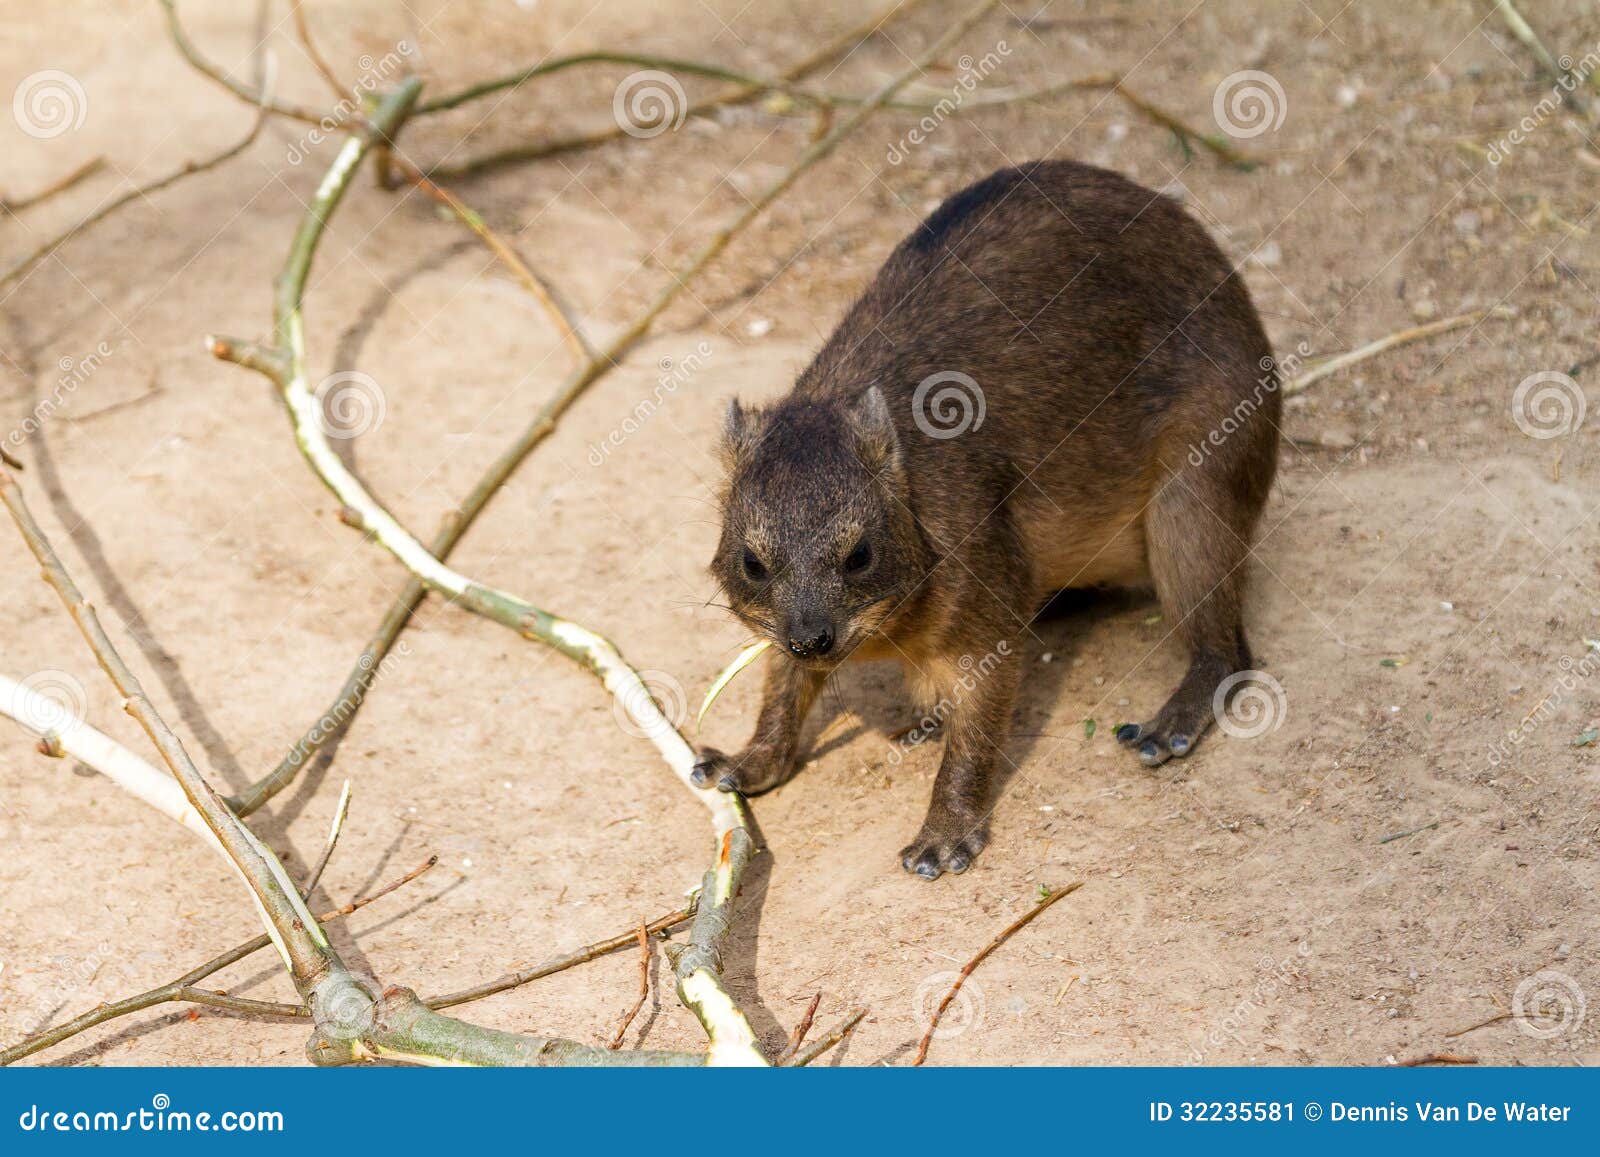 The Hyrax, a fairly small, thickset, herbivorous mammal in the order Hyracoidea. They are often mistaken for rodents, but in actuality are more closely related to elephants